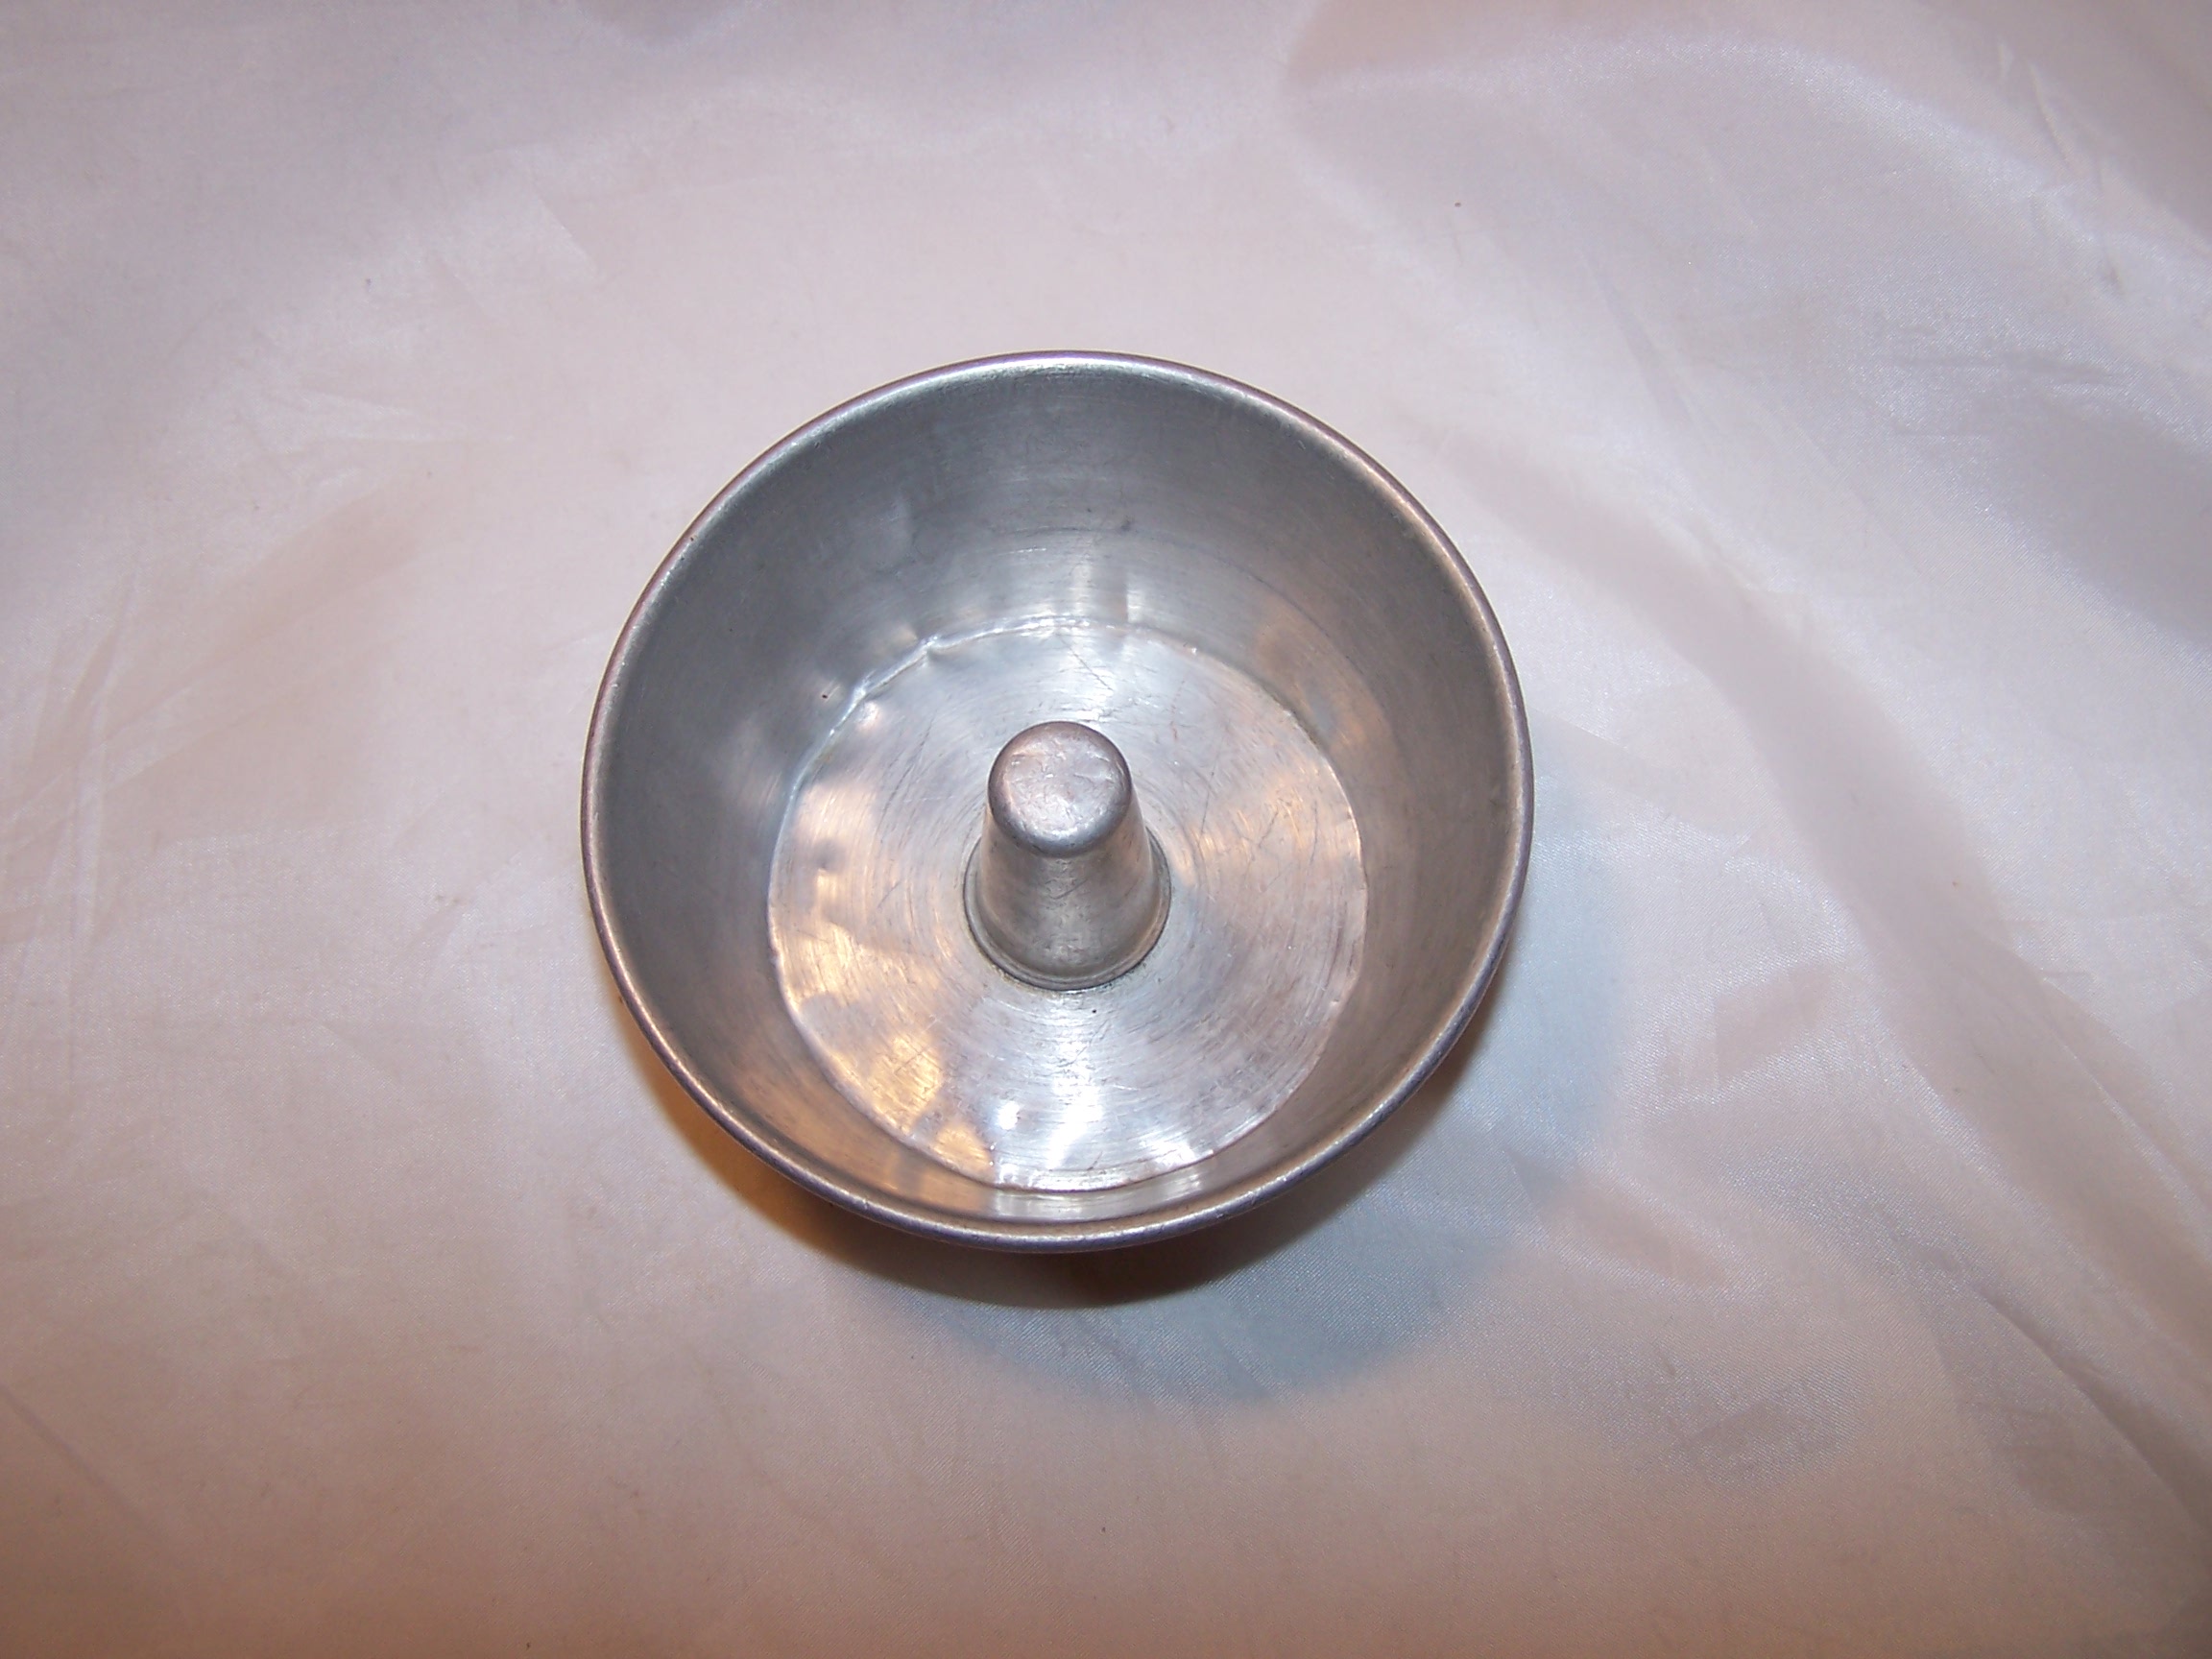 Image 2 of Toy Bundt Cake Pan, Childs Cookware, Aluminum